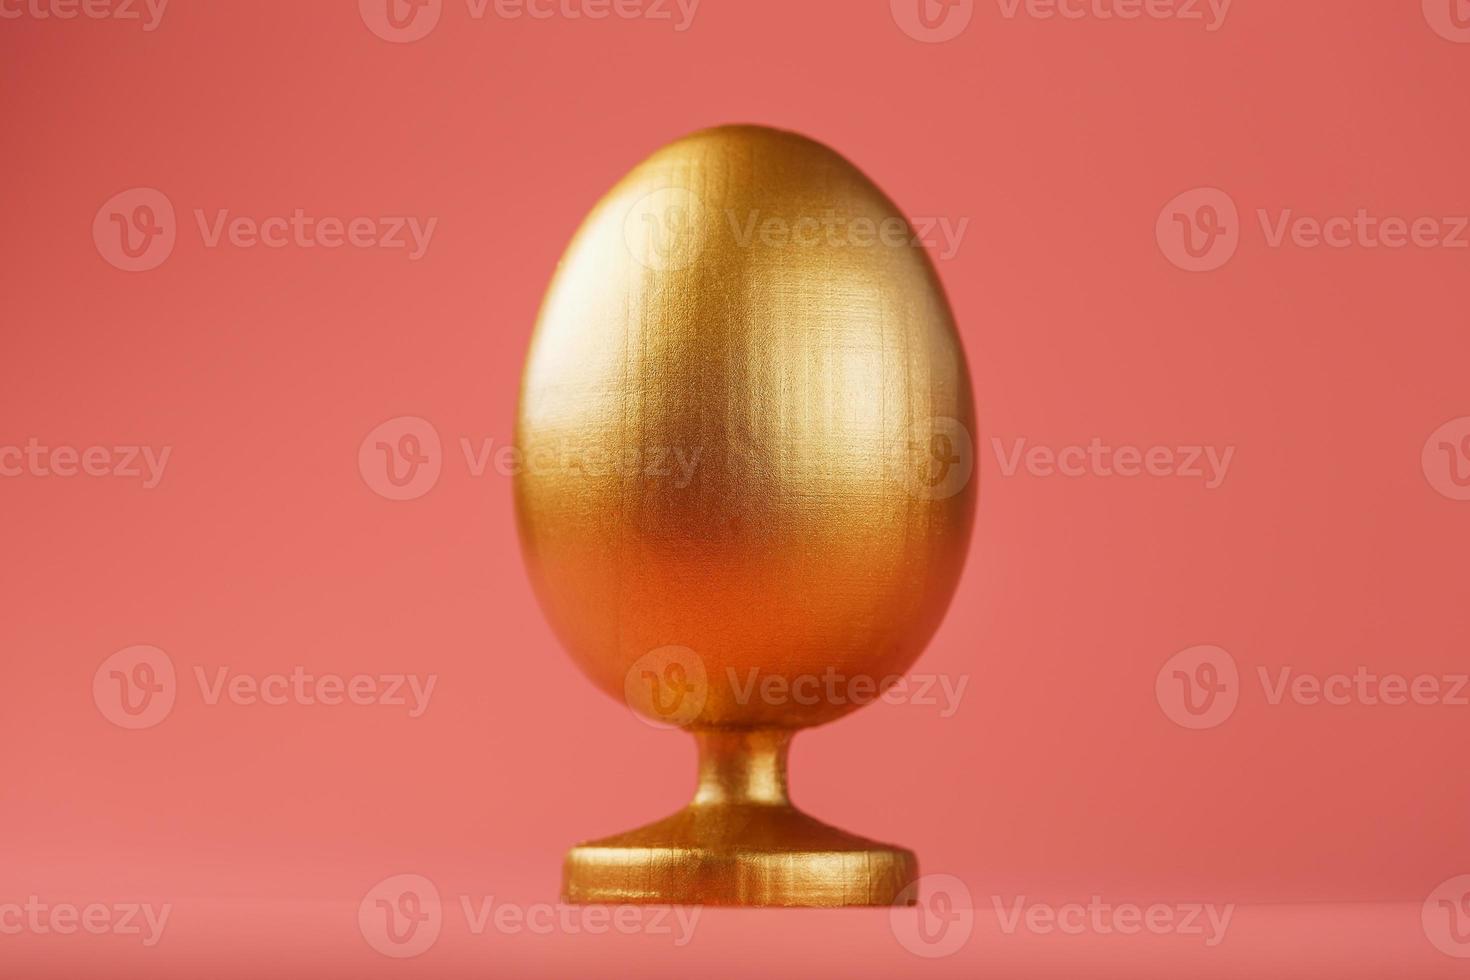 Golden egg on a pink background with a minimalistic concept. Space for text. Easter egg design templates. Stylish decor with minimal concept. photo